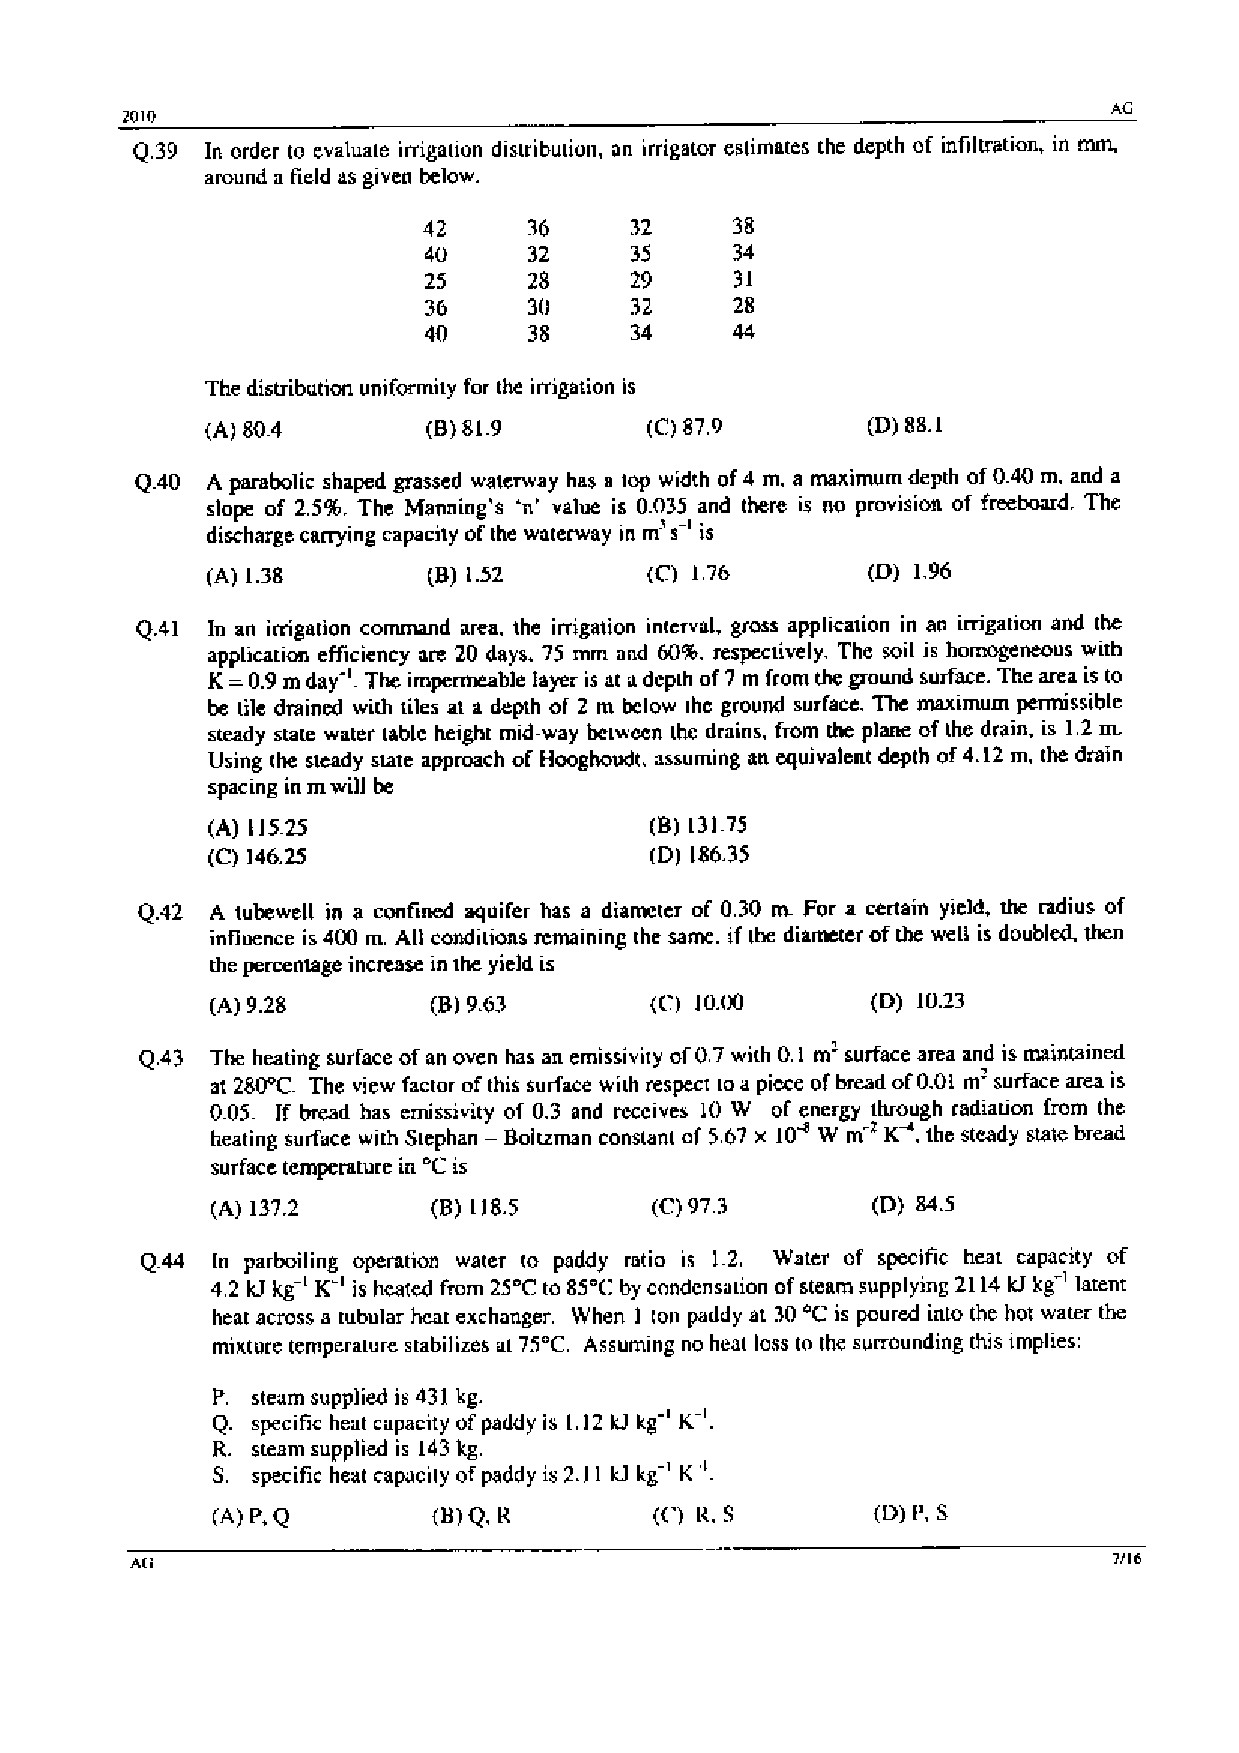 GATE Exam Question Paper 2010 Agricultural Engineering 7